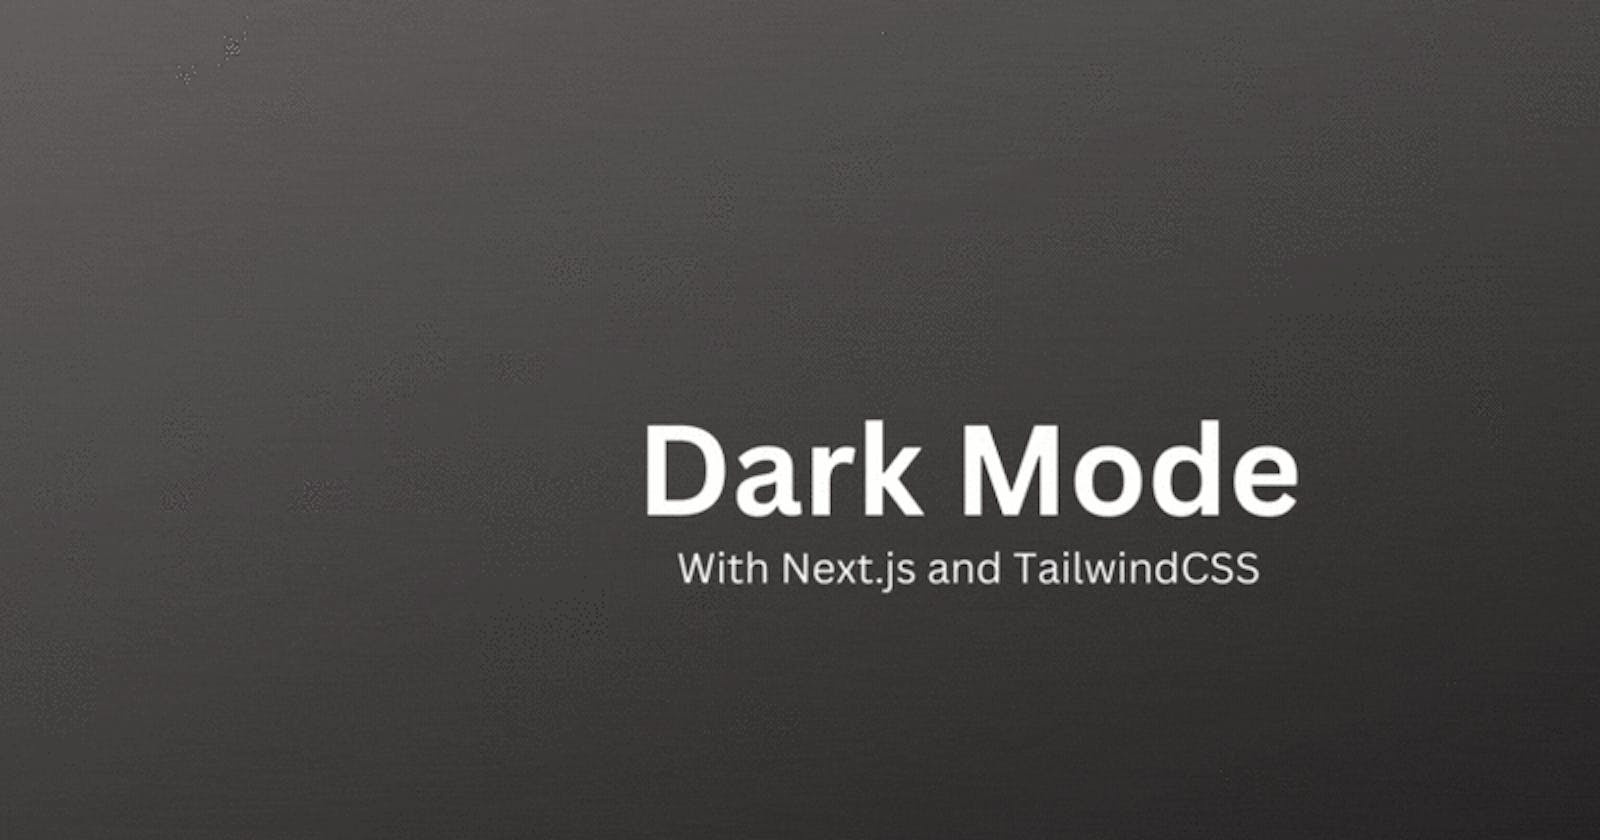 Implementing Dark Mode in Next.js with Tailwind CSS